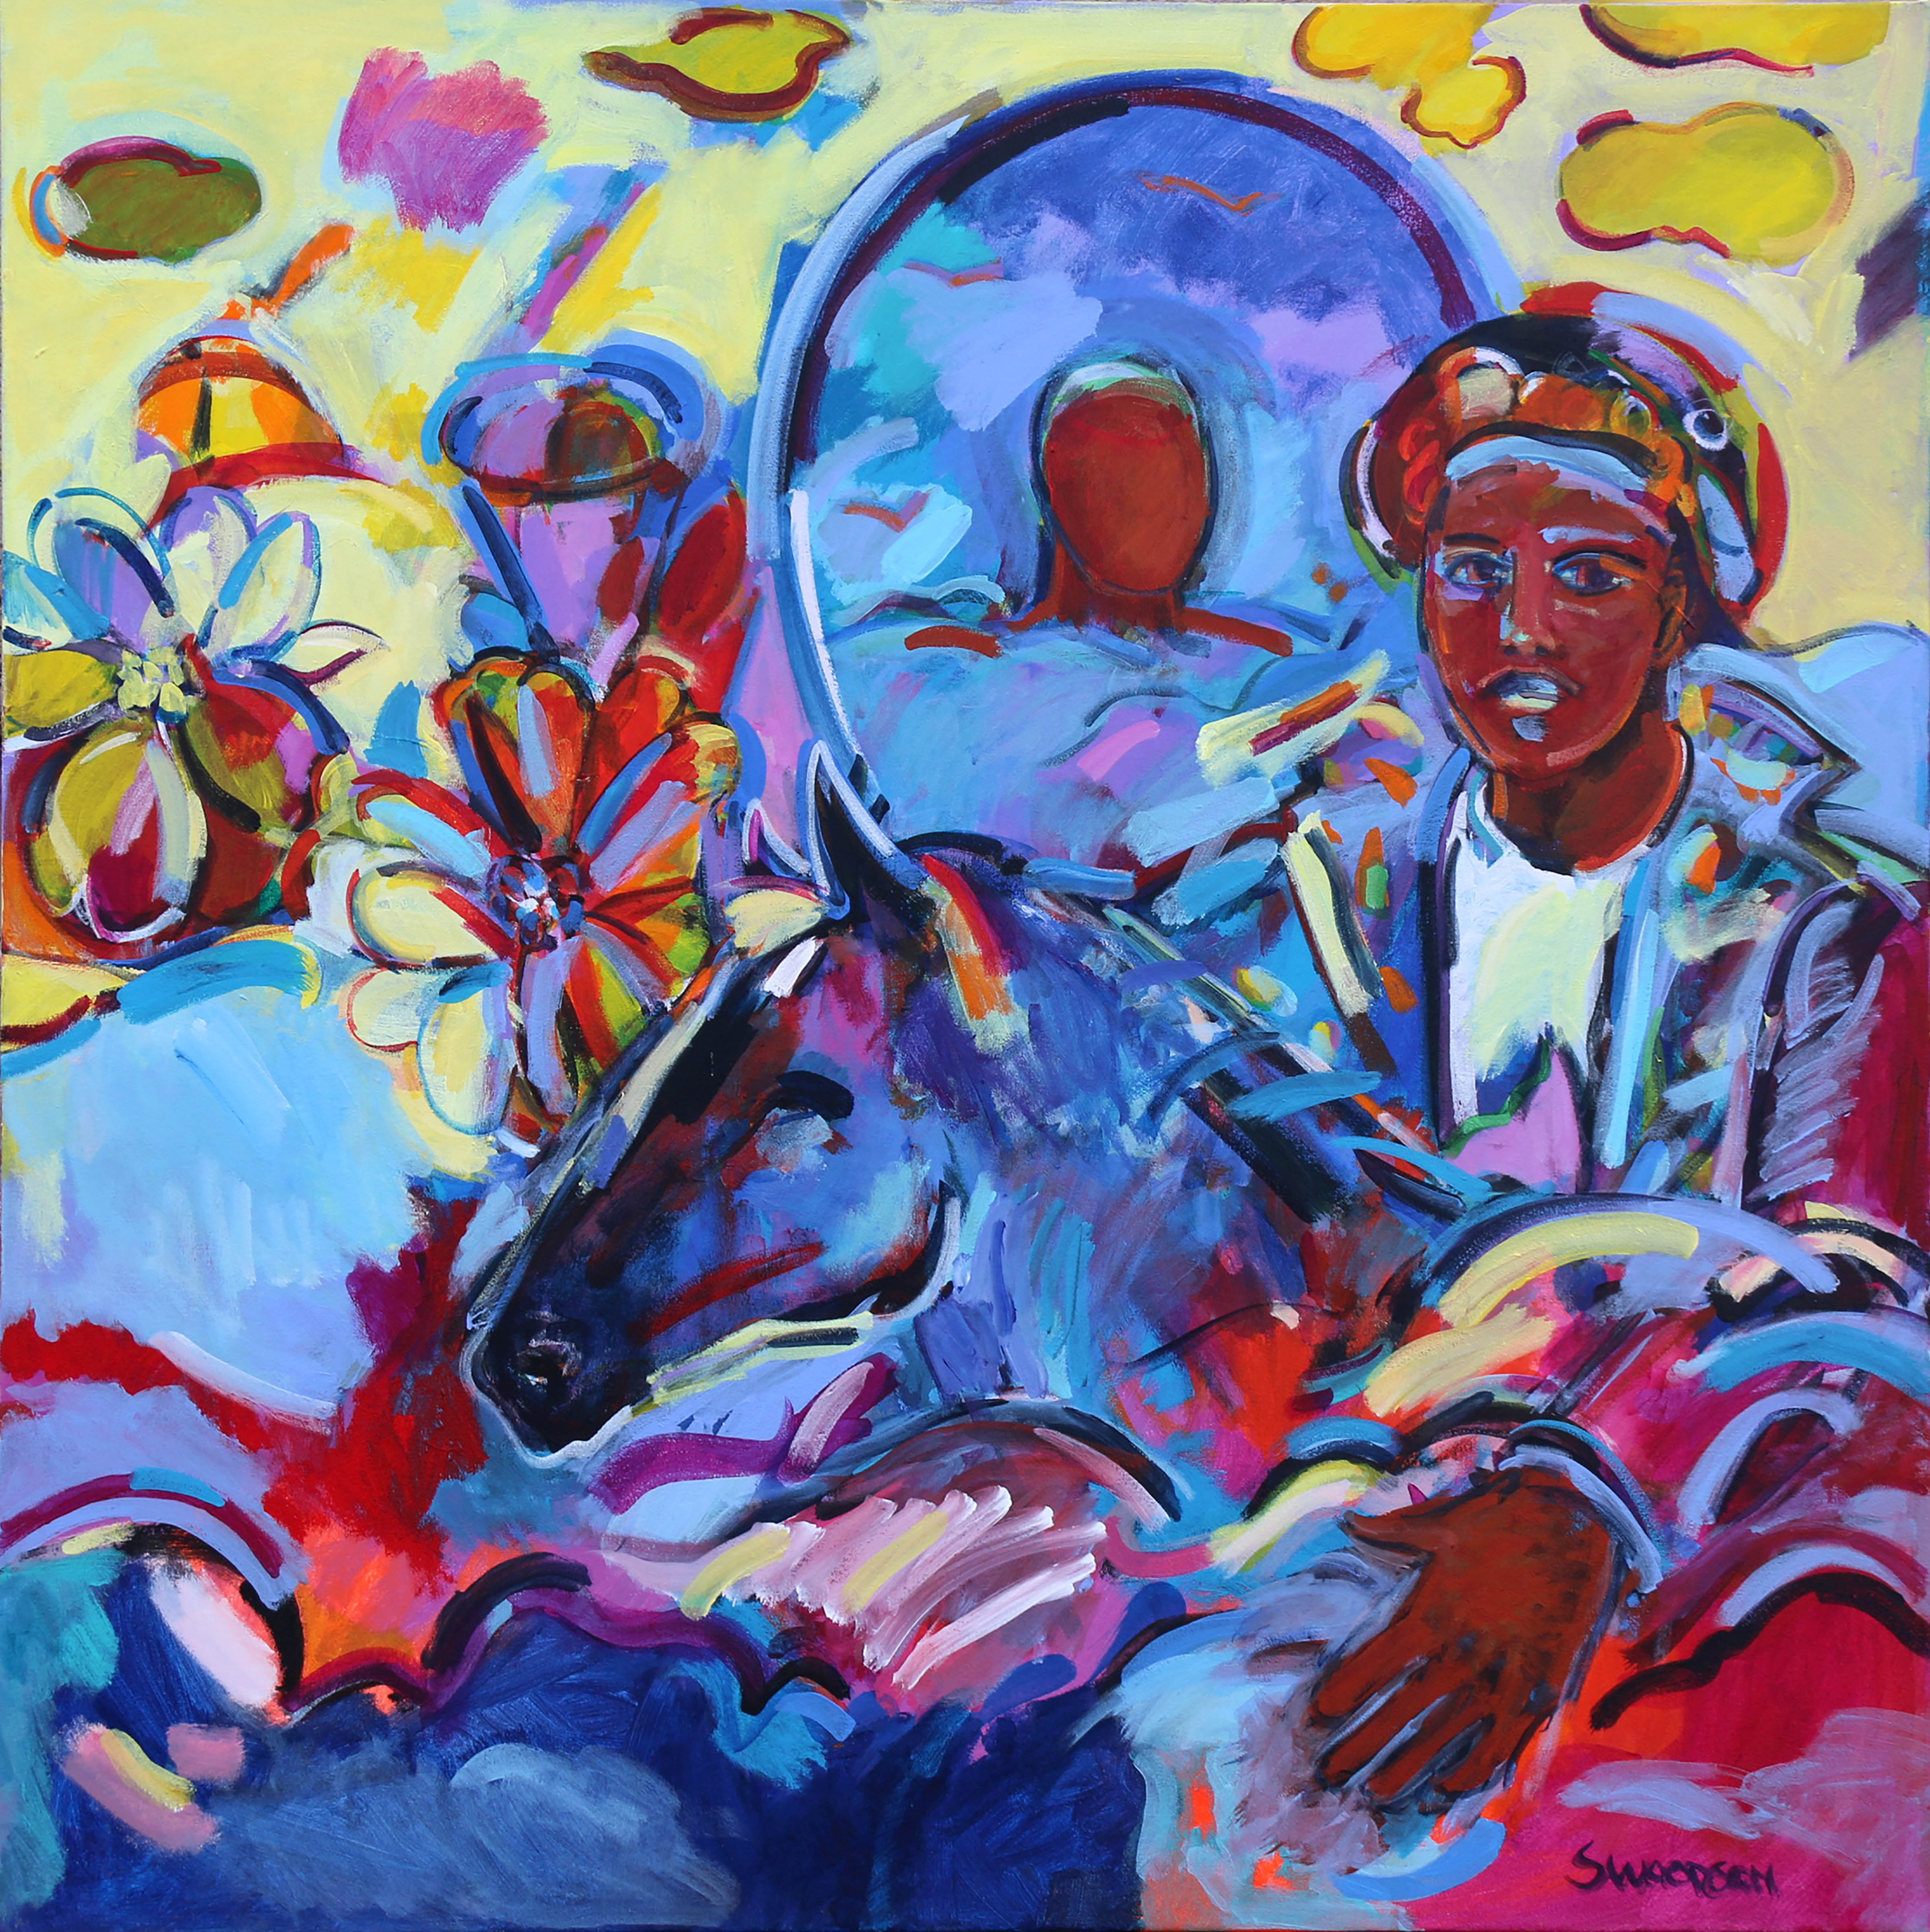 "Flight with Mirror," 2014, Shirley Woodson, American; acrylic on canvas.